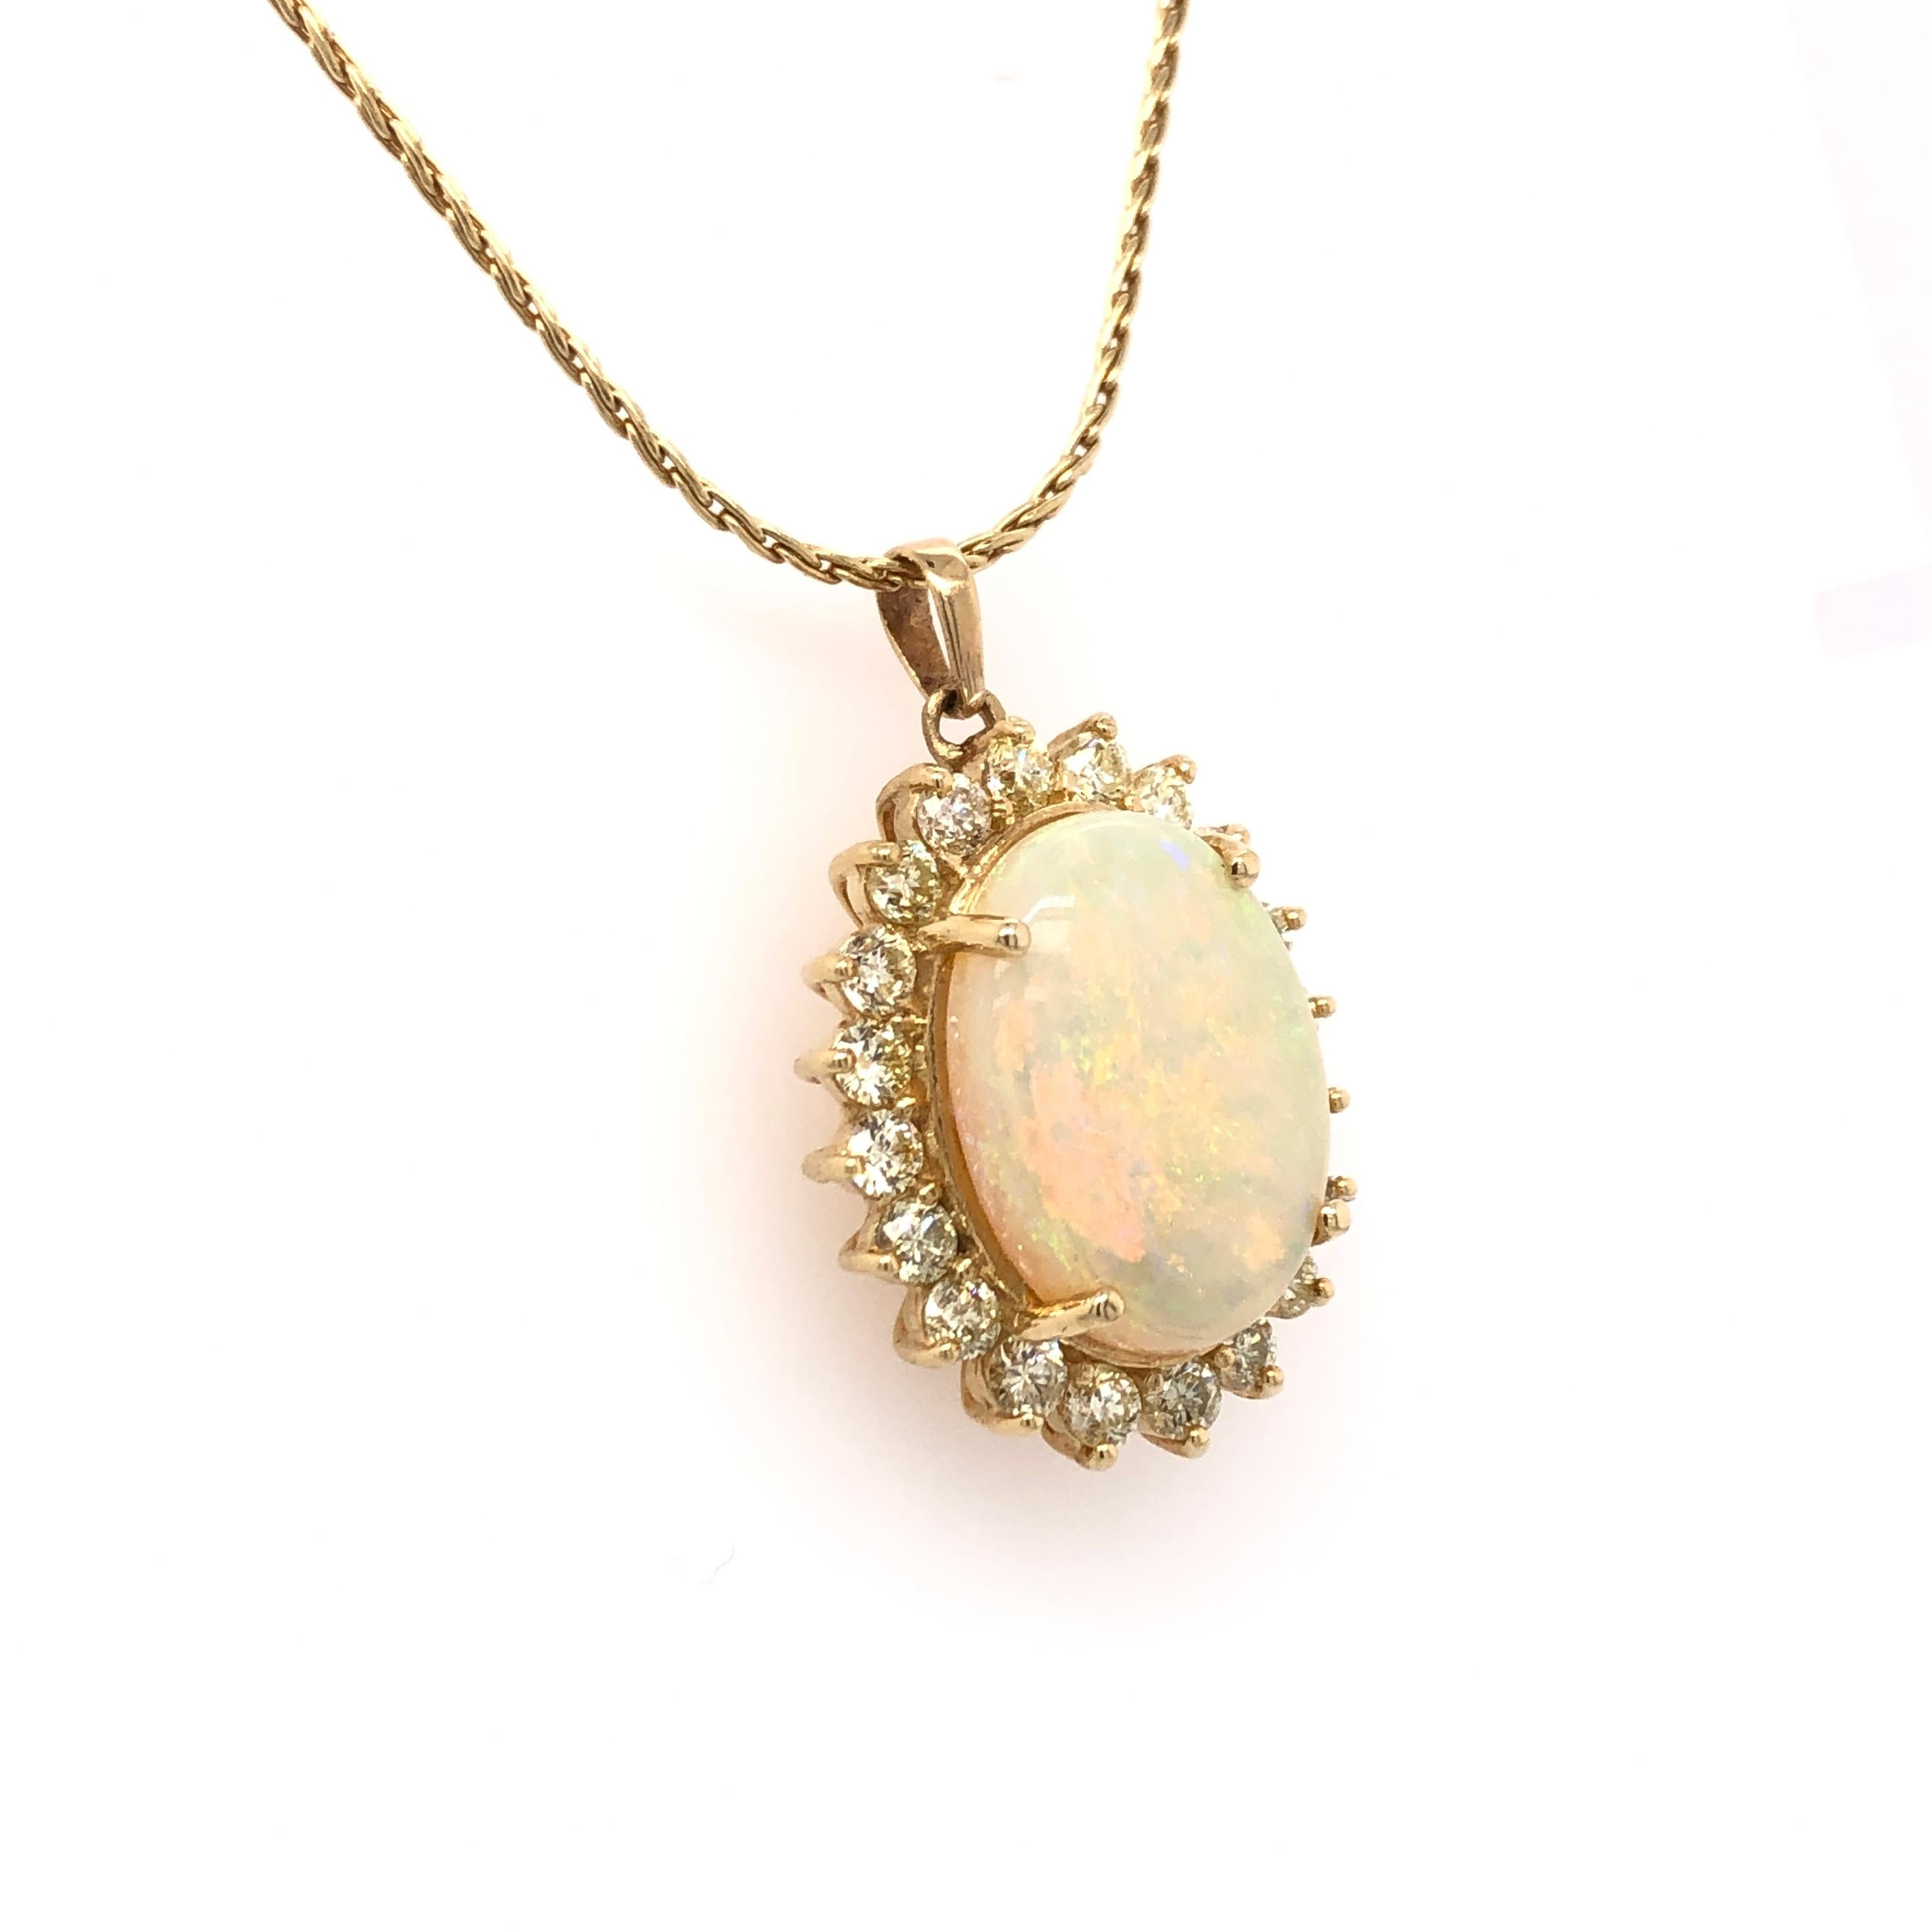 A large, beautiful white opal is surrounded by twenty 3 mm round diamonds all set in to an elegant 18K yellow gold setting. The pendant rests on an 18